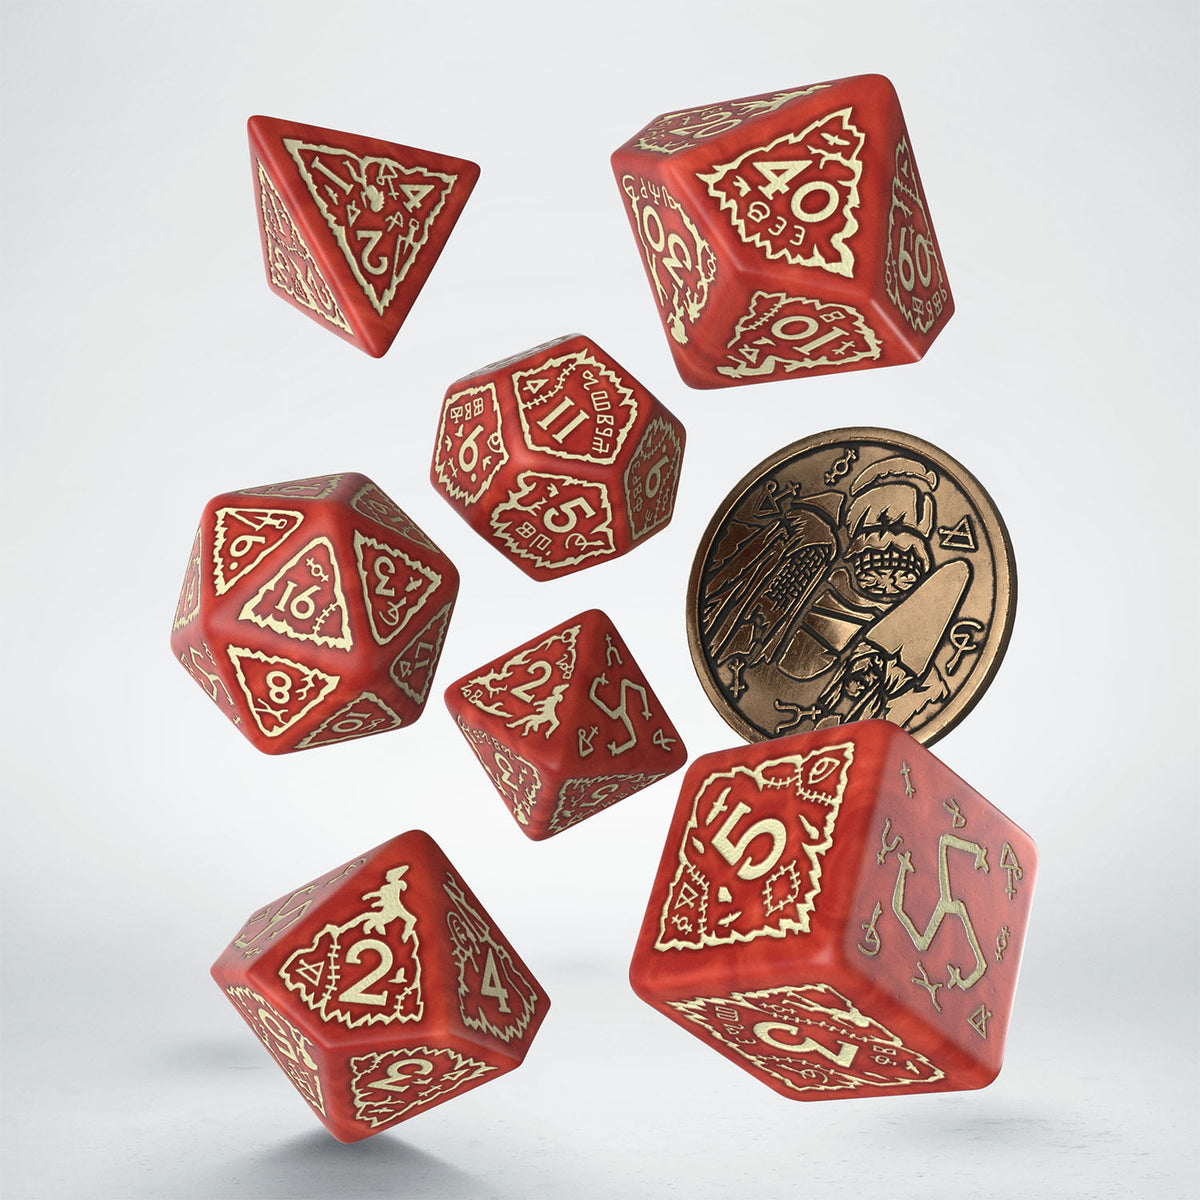 Q Workshop - The Witcher Dice Set Crones - Brewess Dice Set 7 With Coin